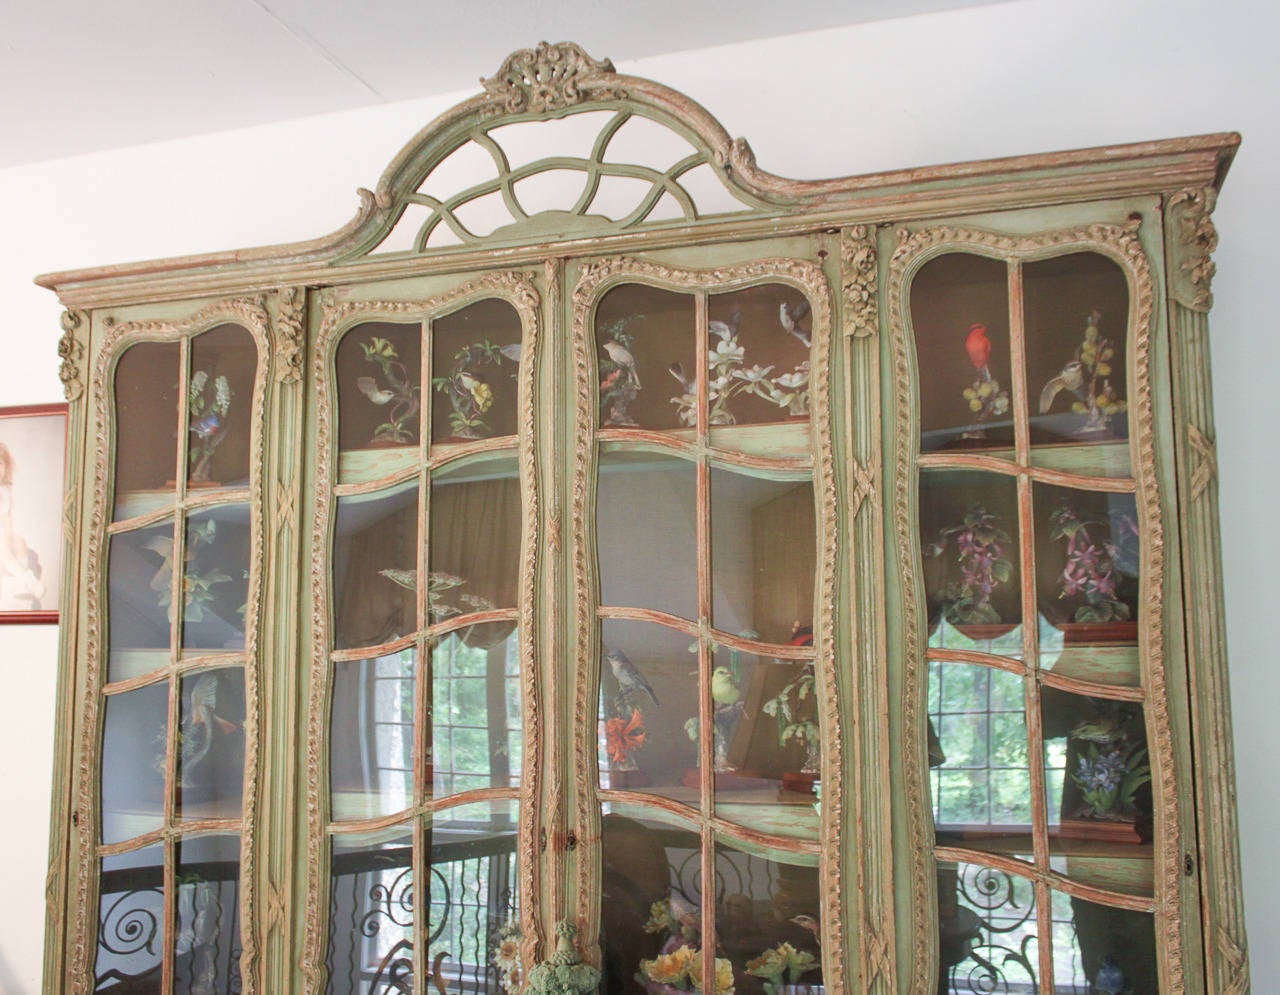 Exceptional French hand-carved and painted 4 door display case.  Beautifully carved in floral and ribbon motif.  Having an aged painted finish that offers rich character and charm. A classic of heirloom quality and craftsmanship!